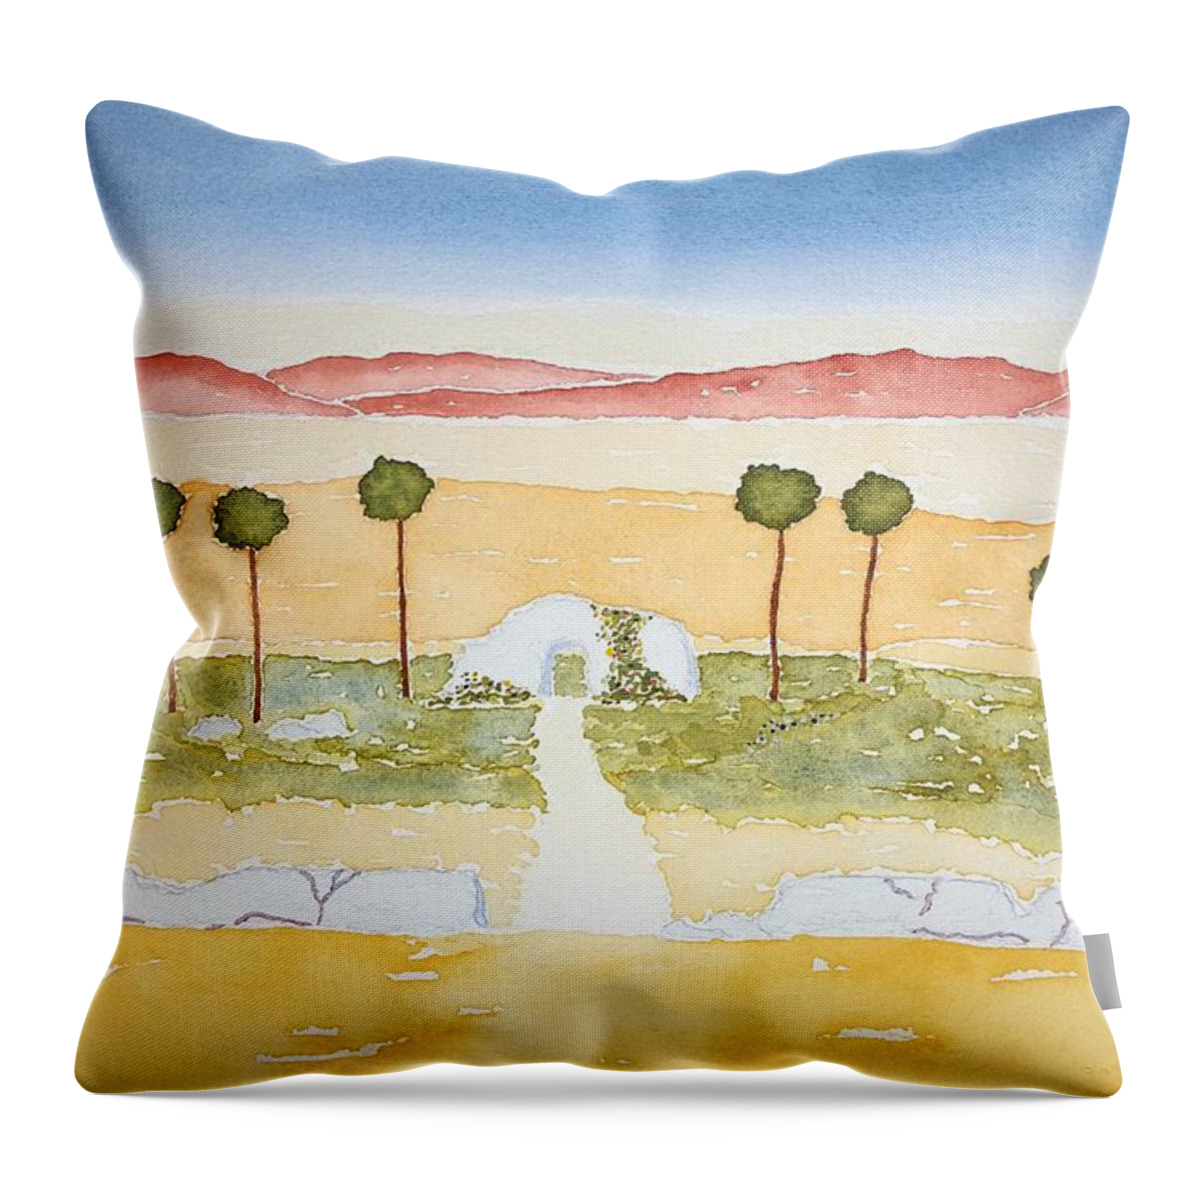 Watercolor Throw Pillow featuring the painting Oasis of Lore by John Klobucher